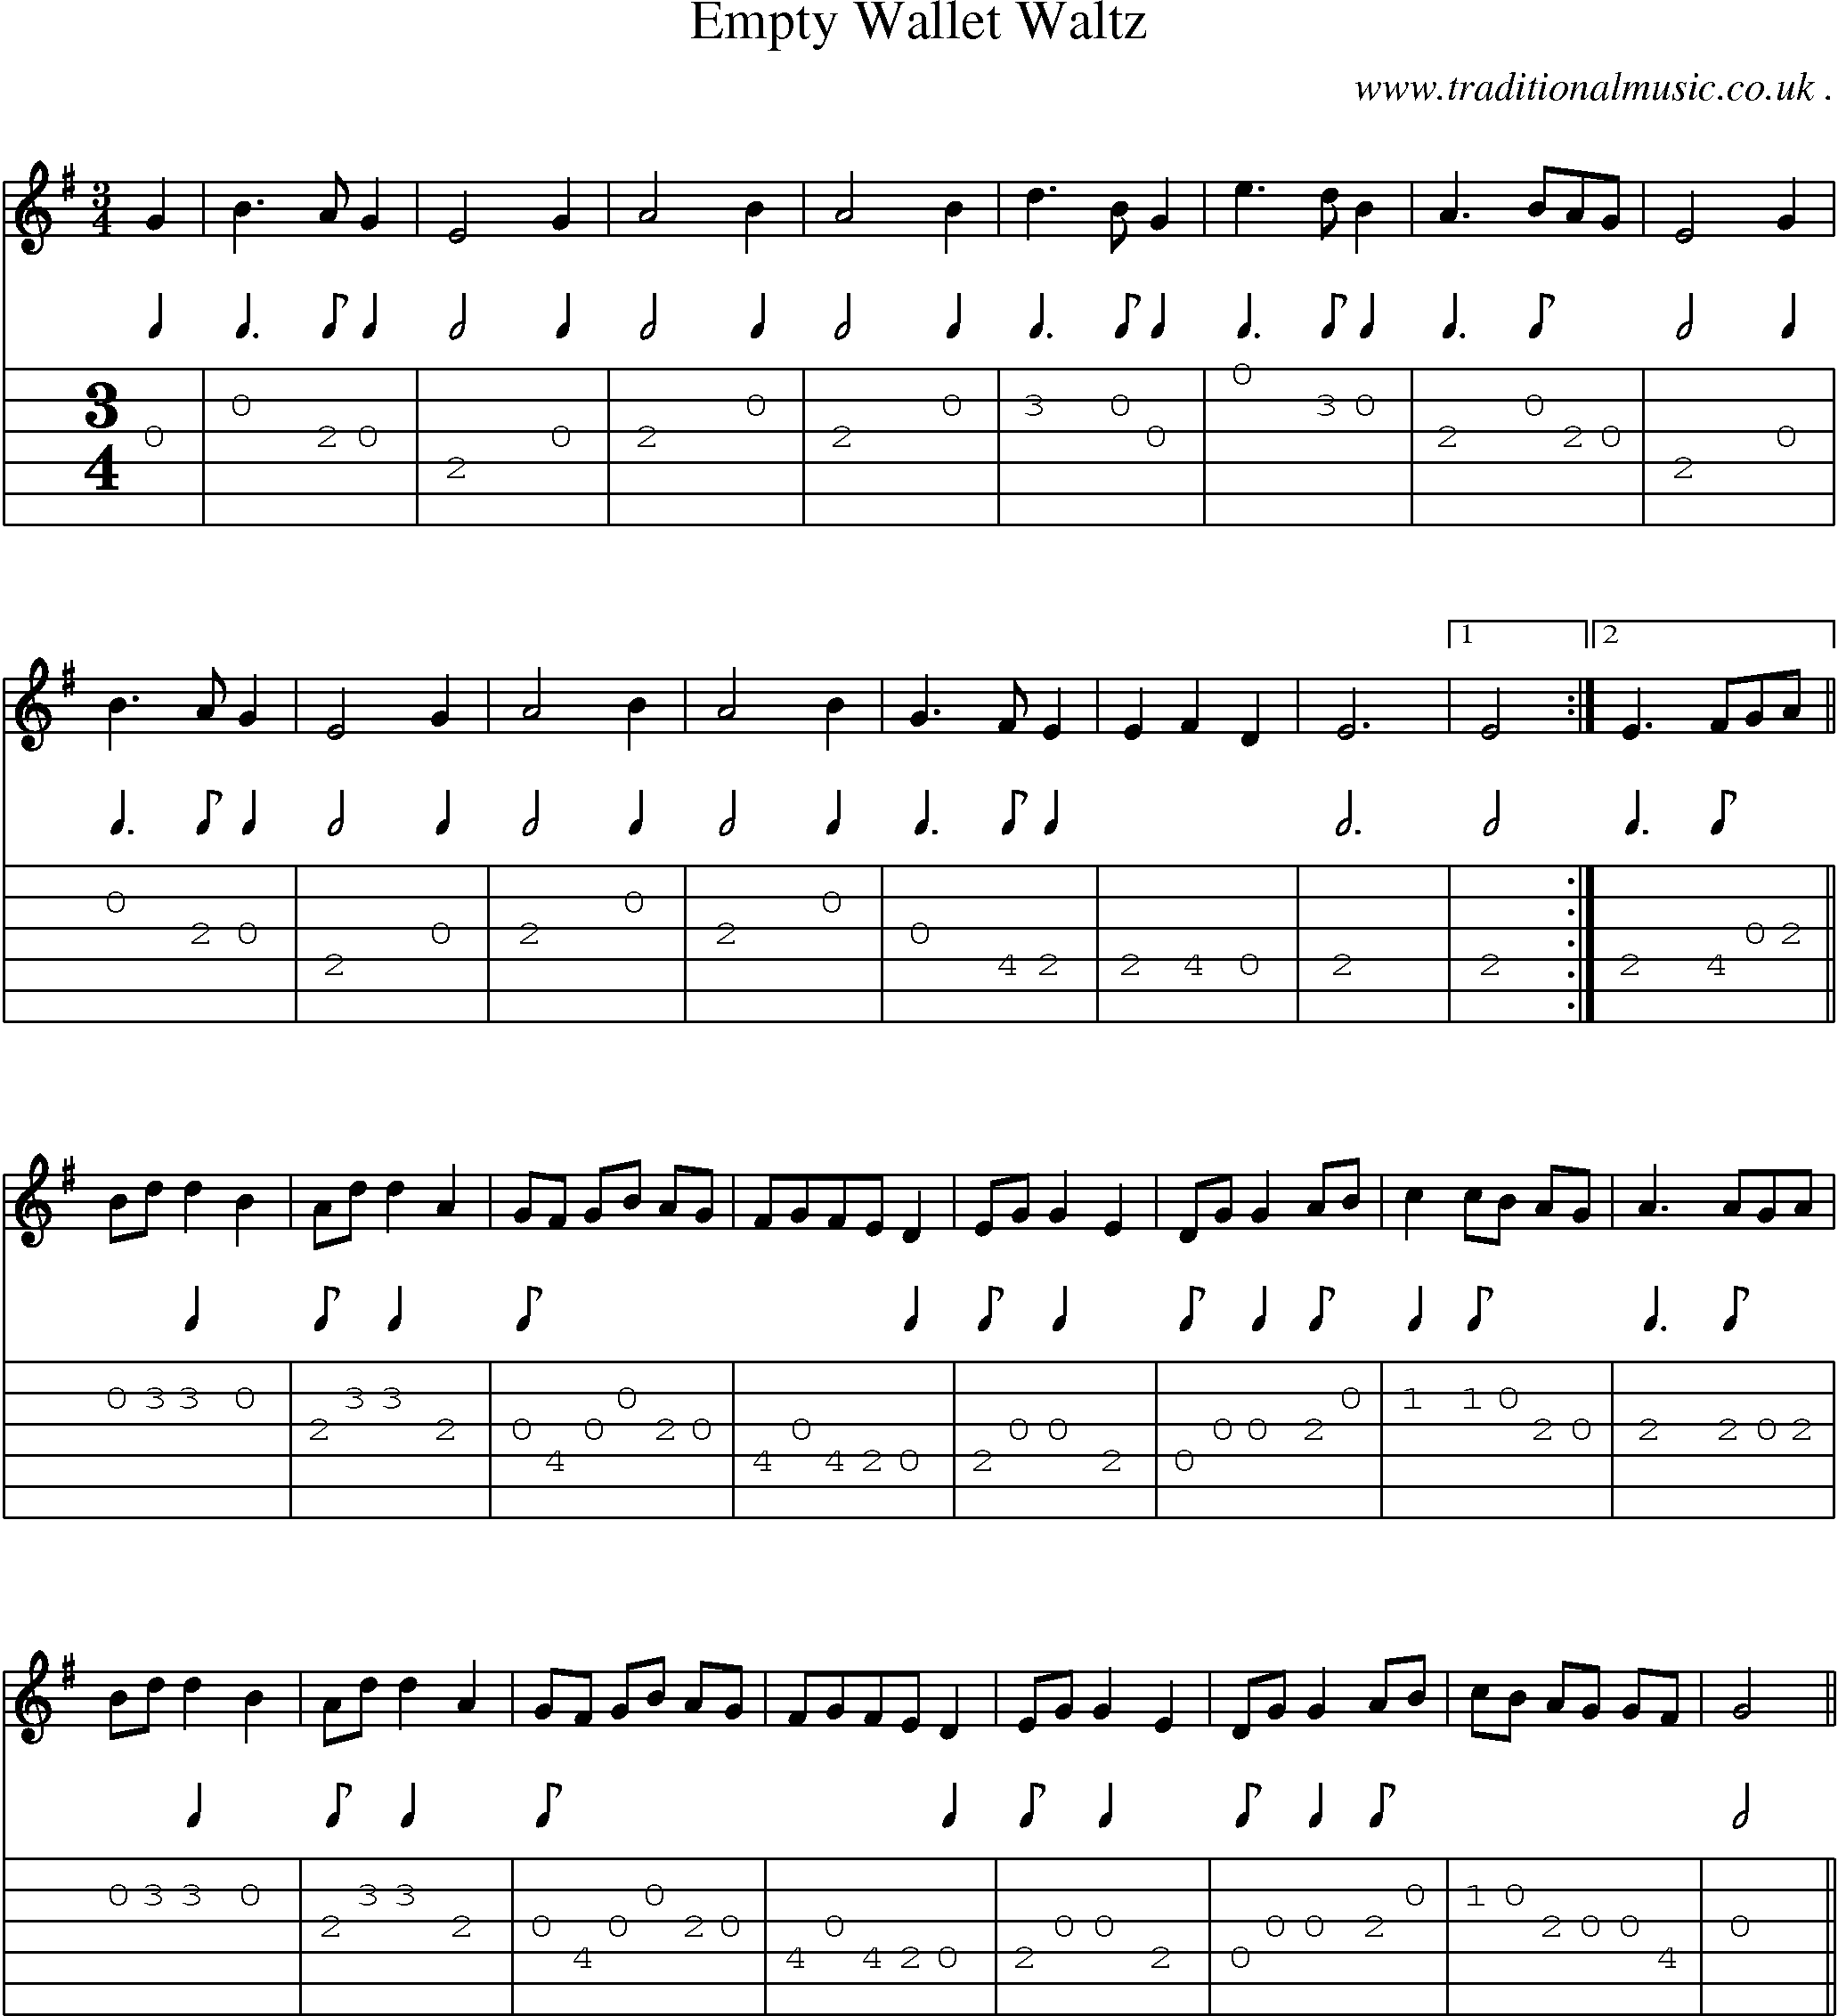 Sheet-Music and Guitar Tabs for Empty Wallet Waltz